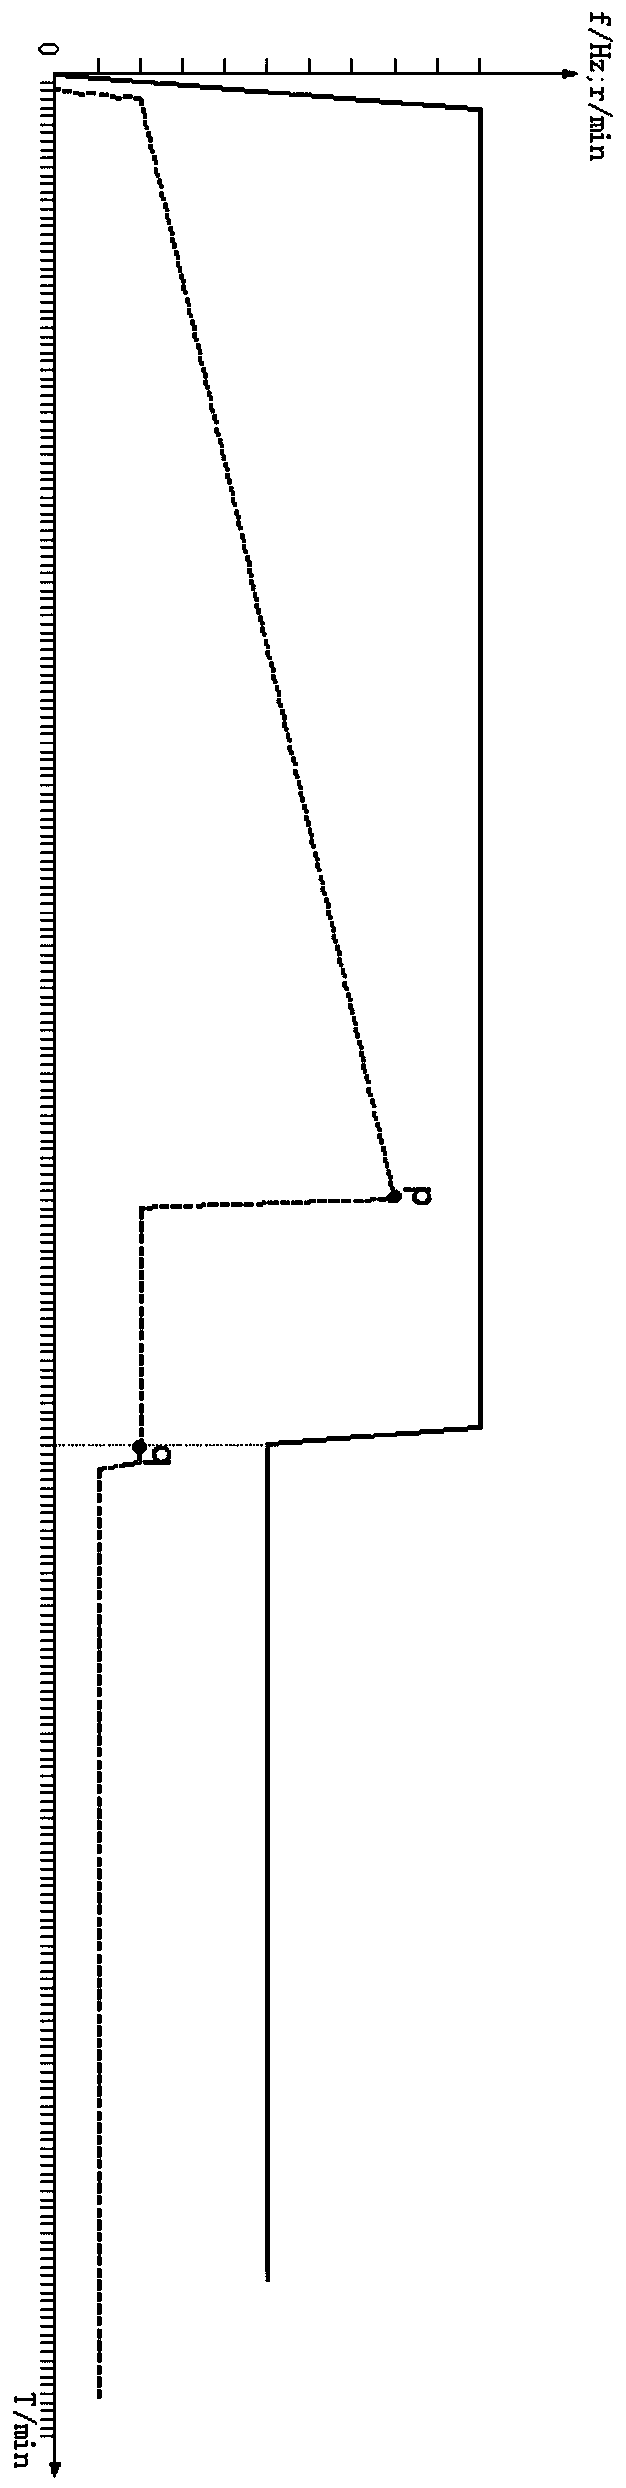 Control method of frequency conversion air conditioner